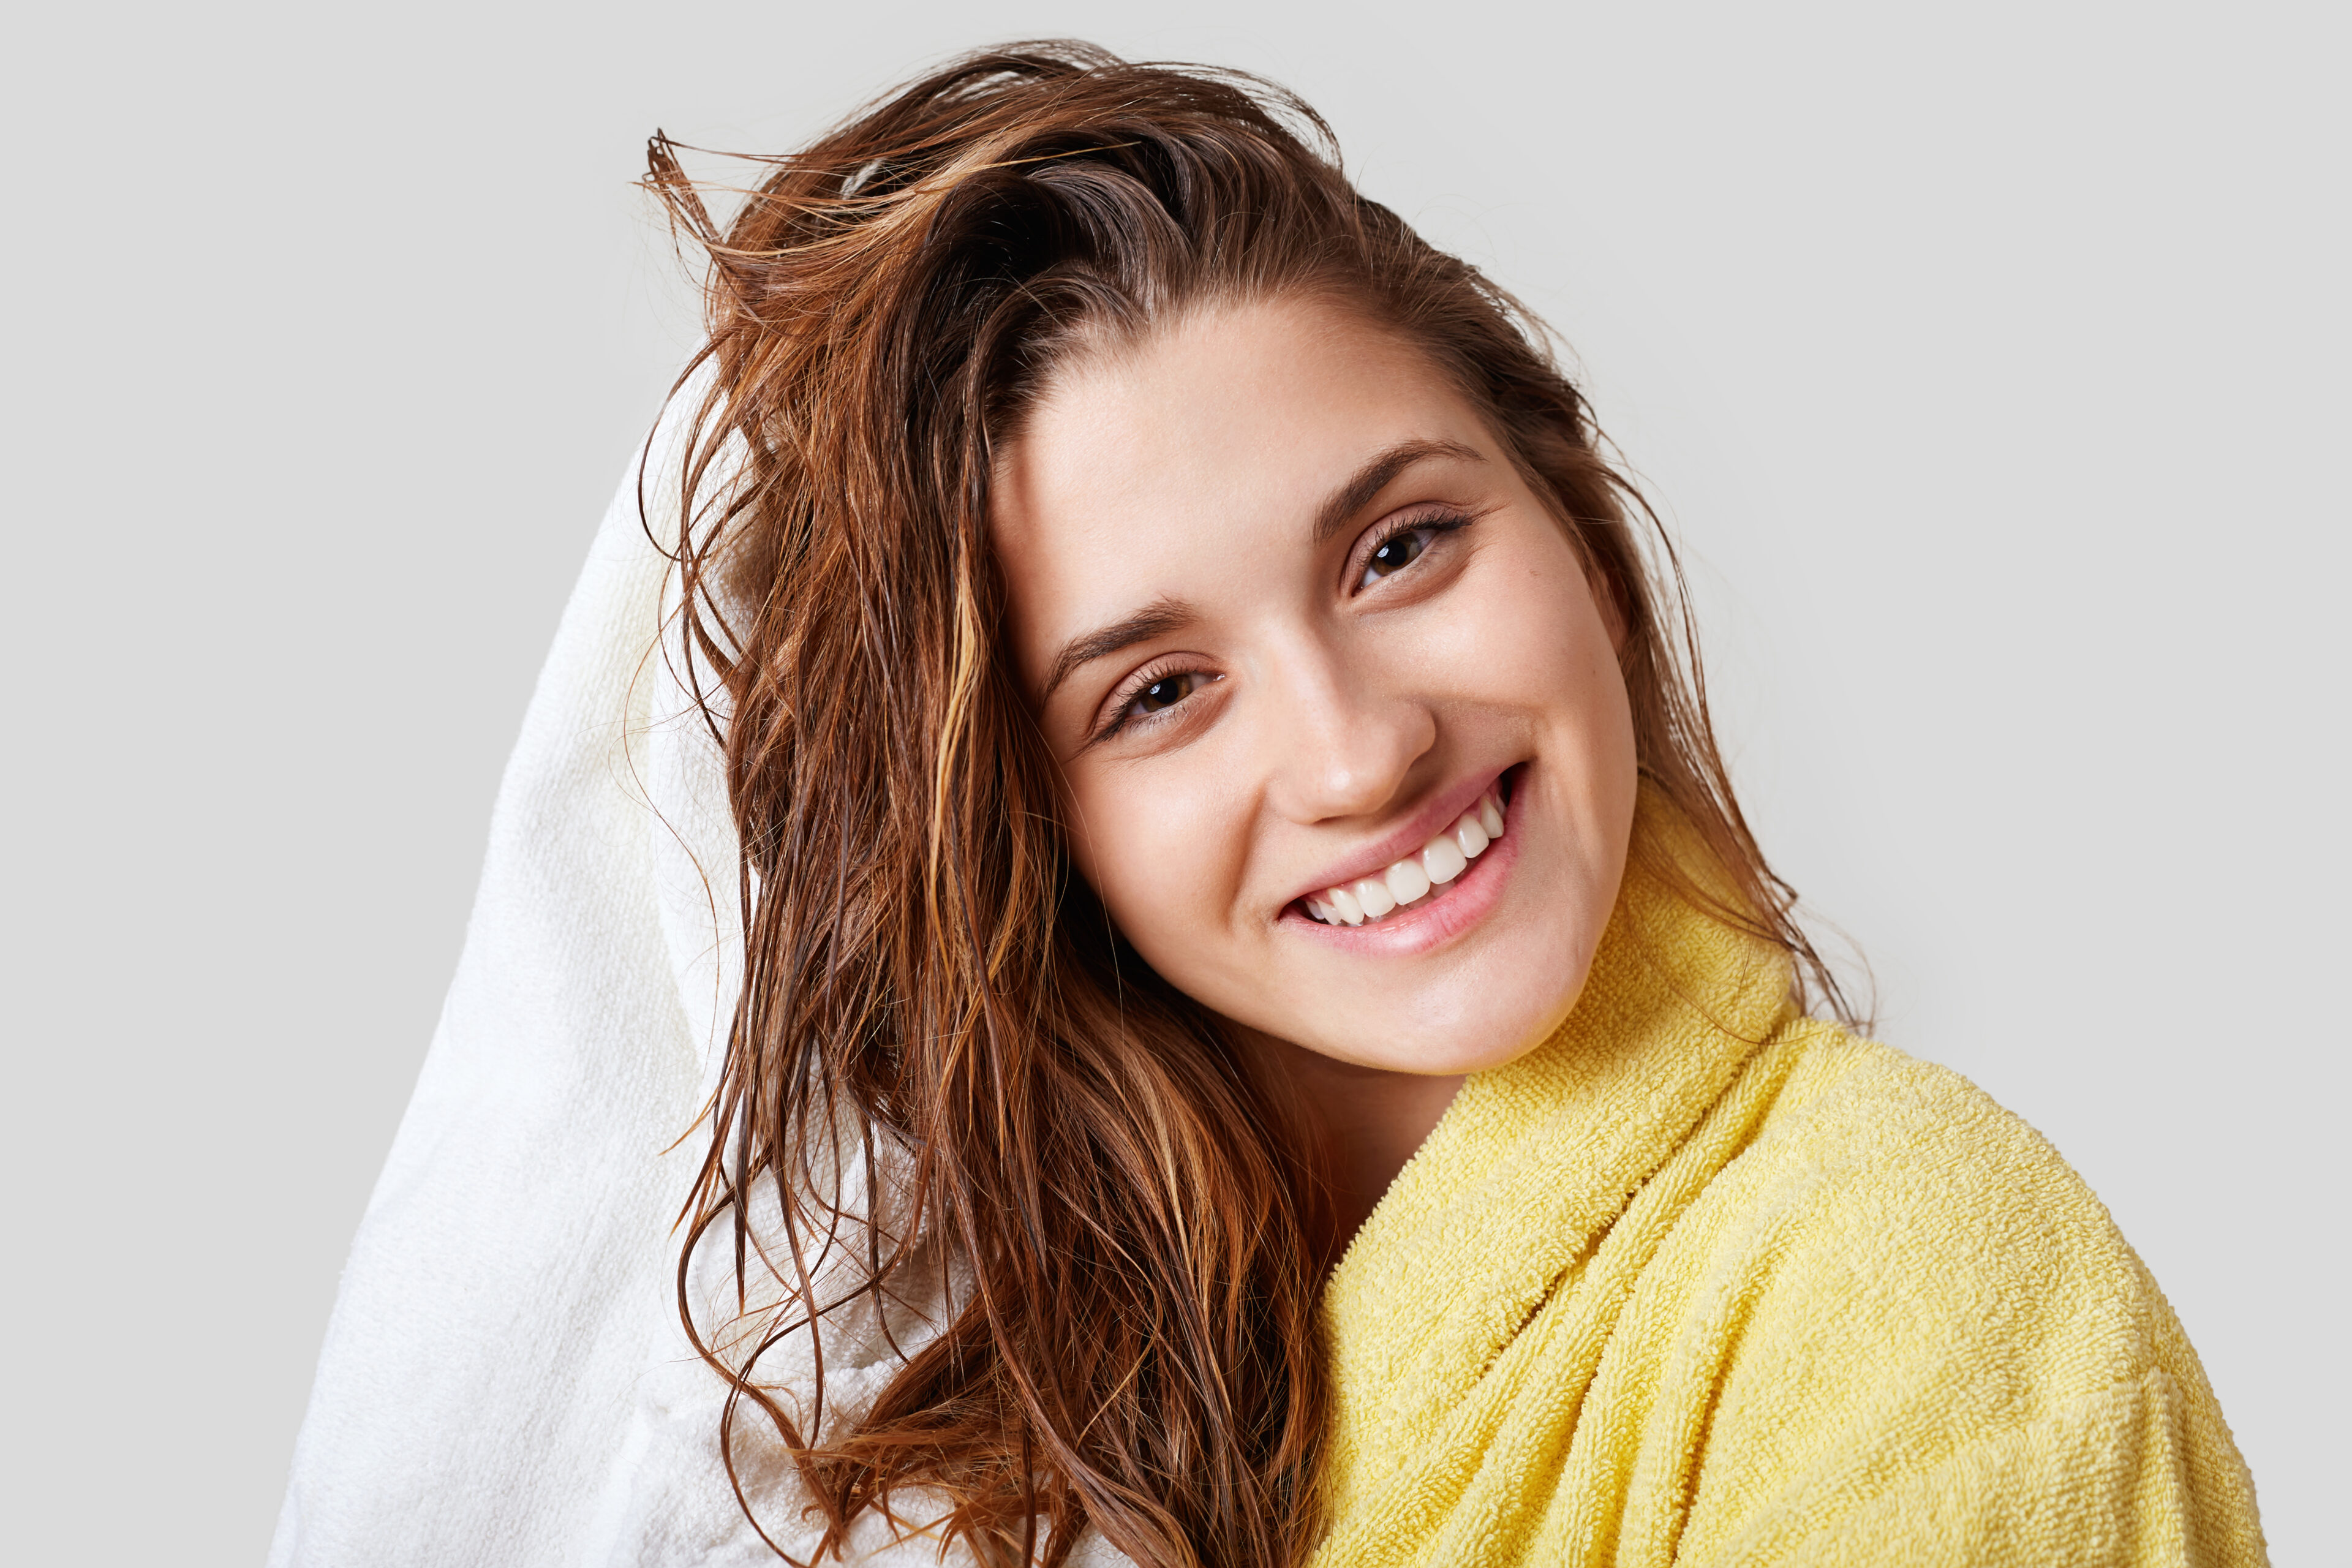 Female with wet hair, showering, drying her head with a towel, satisfied after bathing